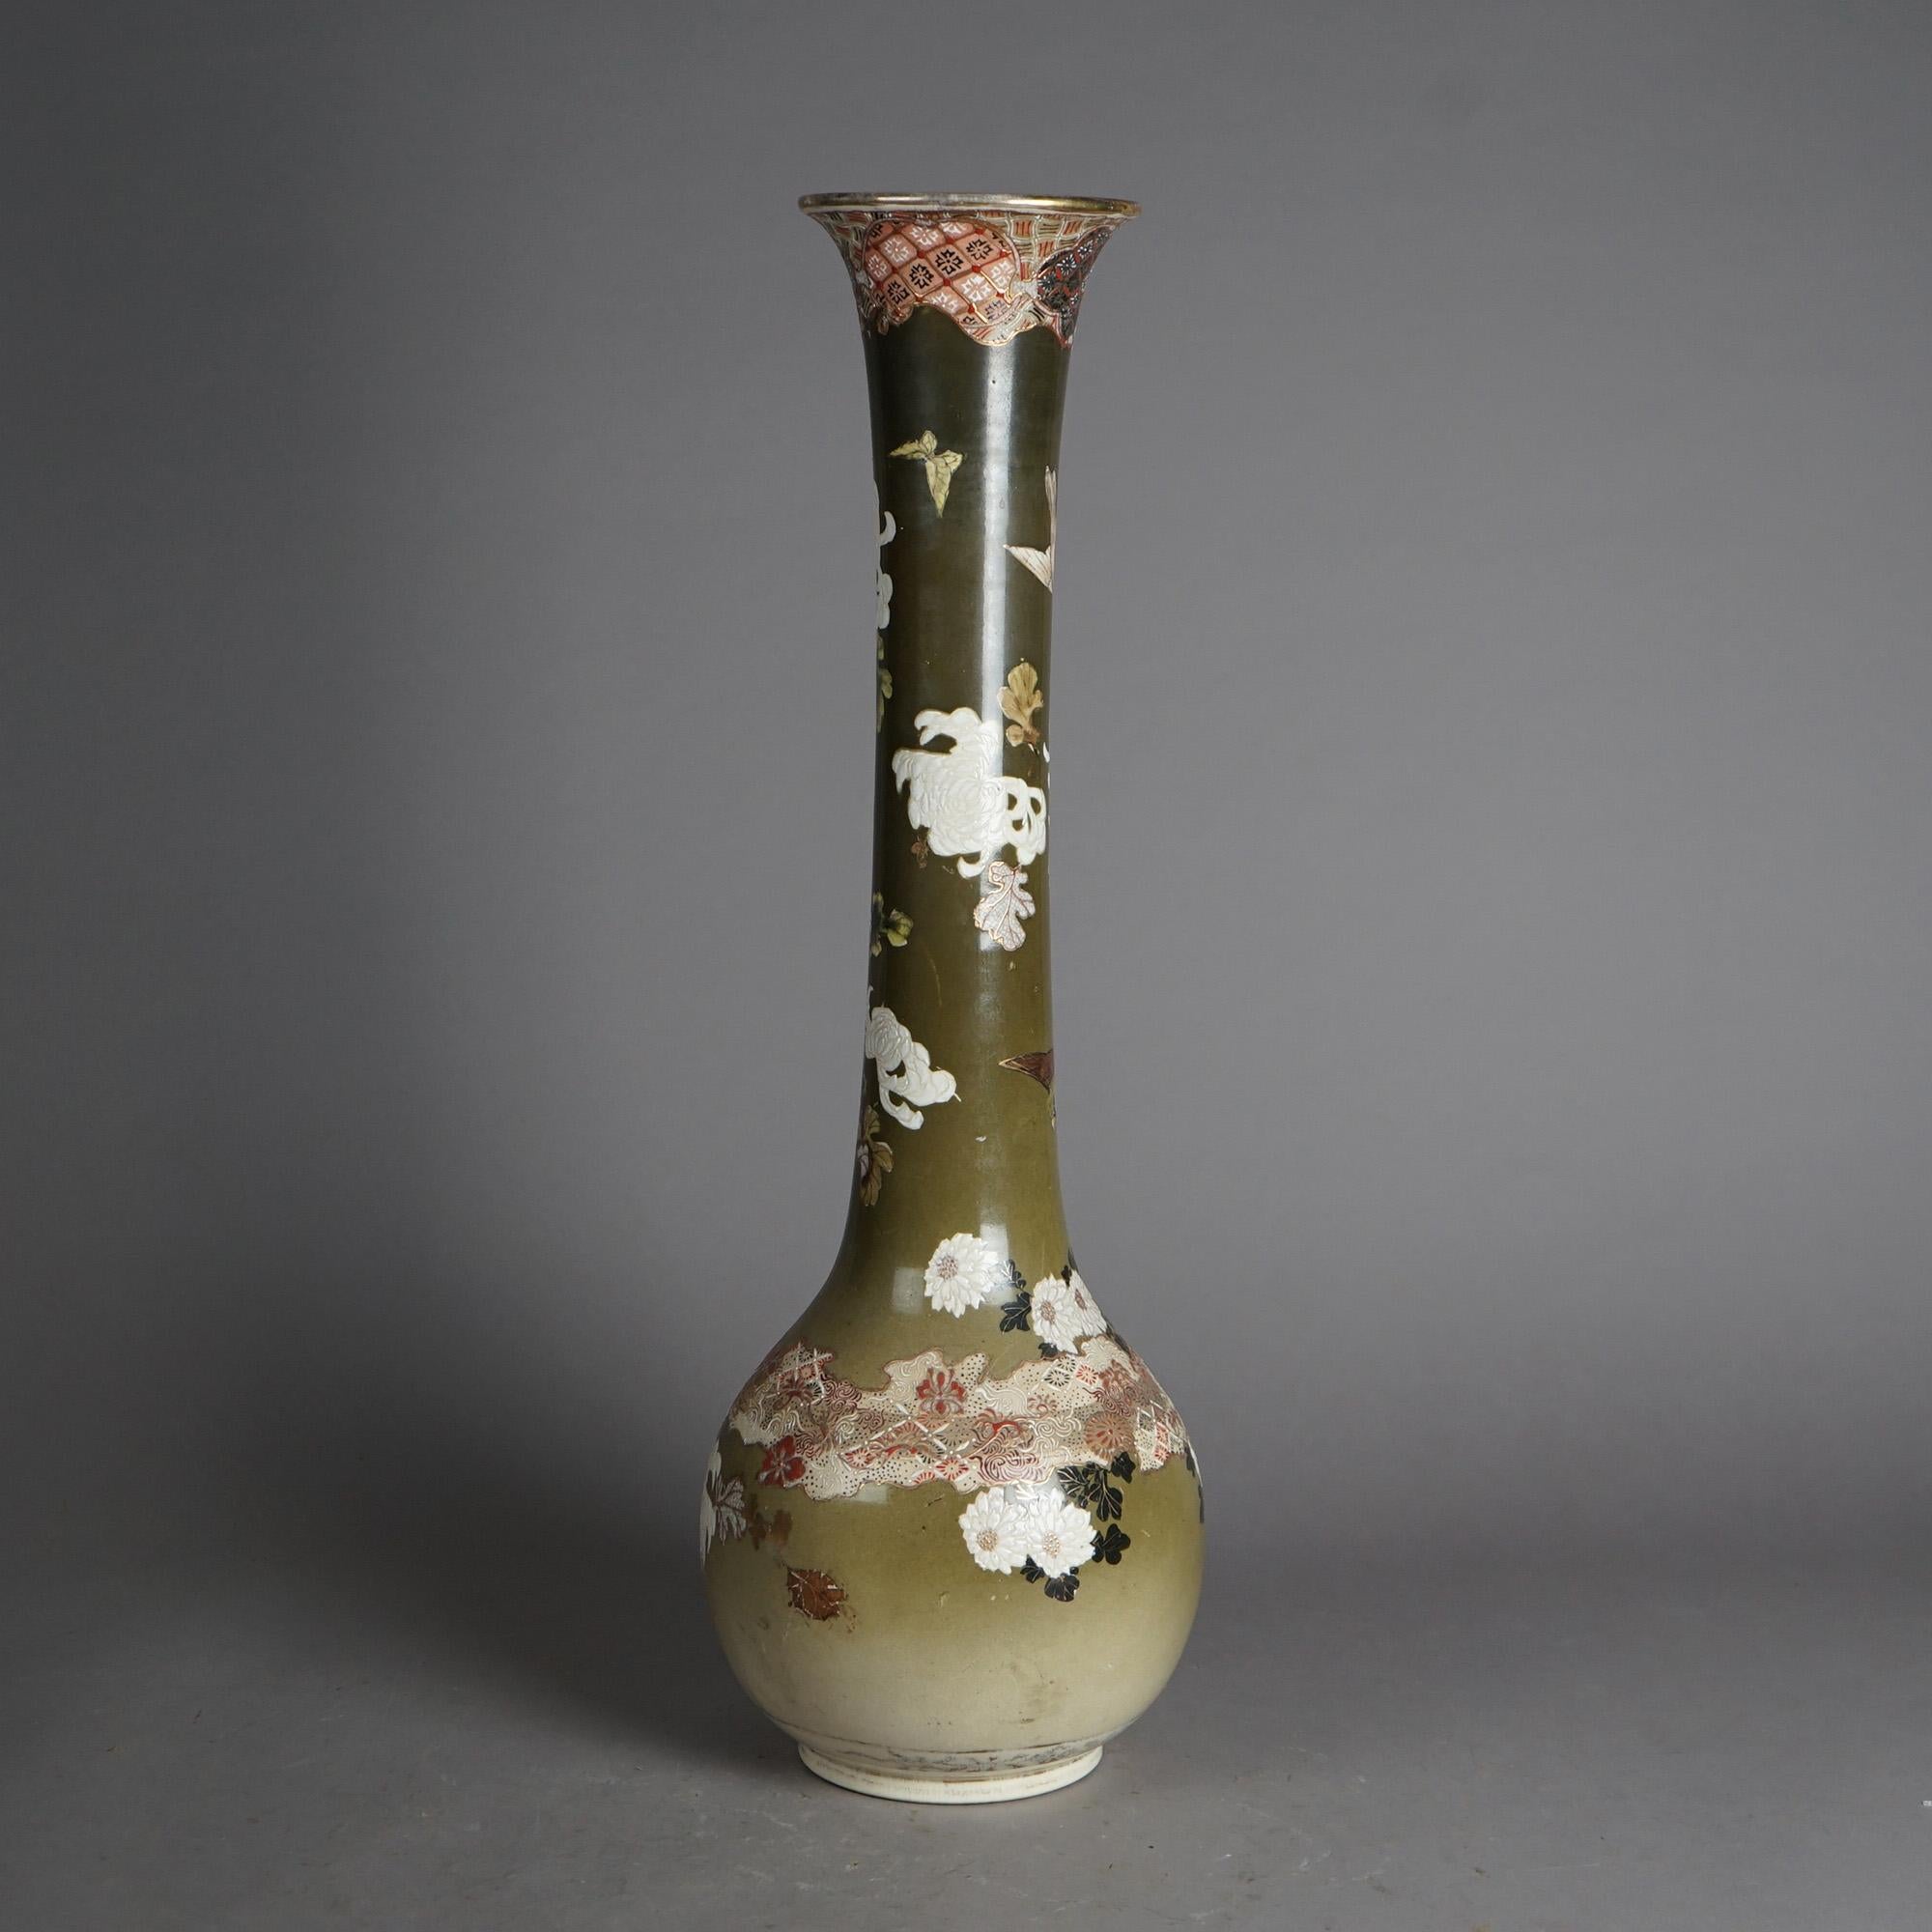 An antique Japanese Meiji Satsuma tall vase offers porcelain construction with hand painted and gilt garden scene having flowers and birds, c1900

Measures- 26.5''H x 8.25''W x 8.25''D